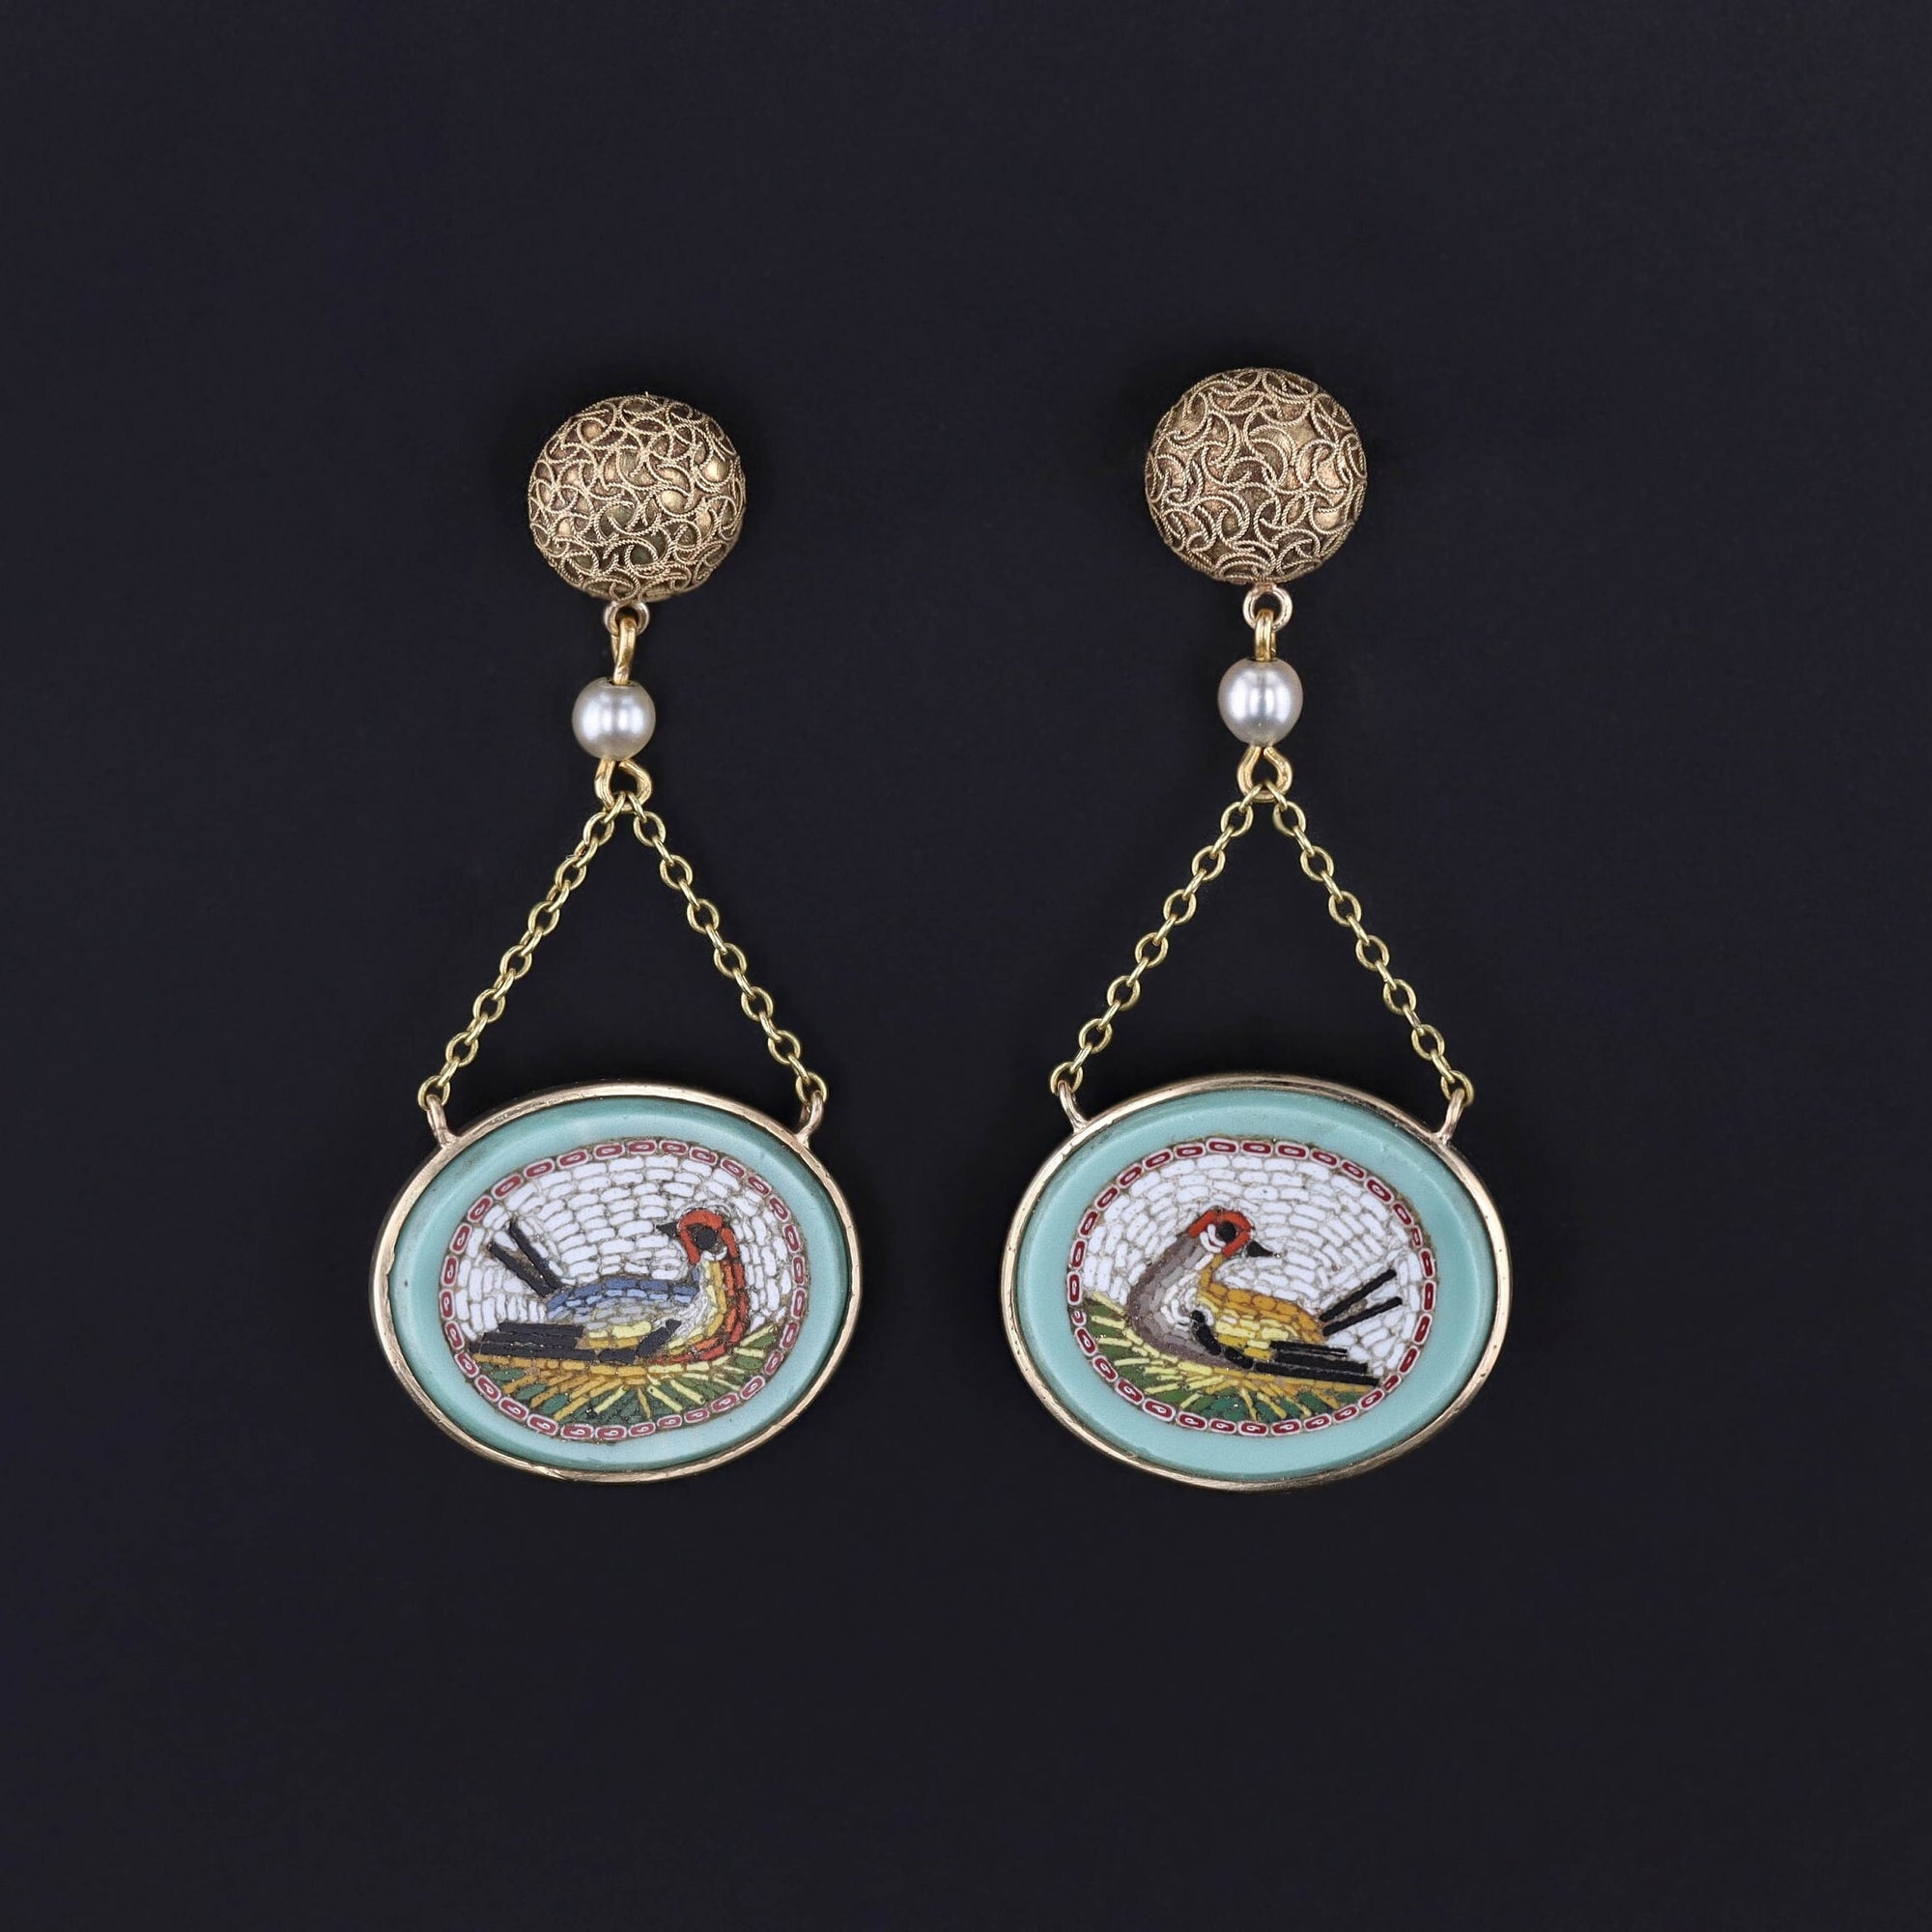 A pair of antique micromosaic bird earrings created with pearl accents.